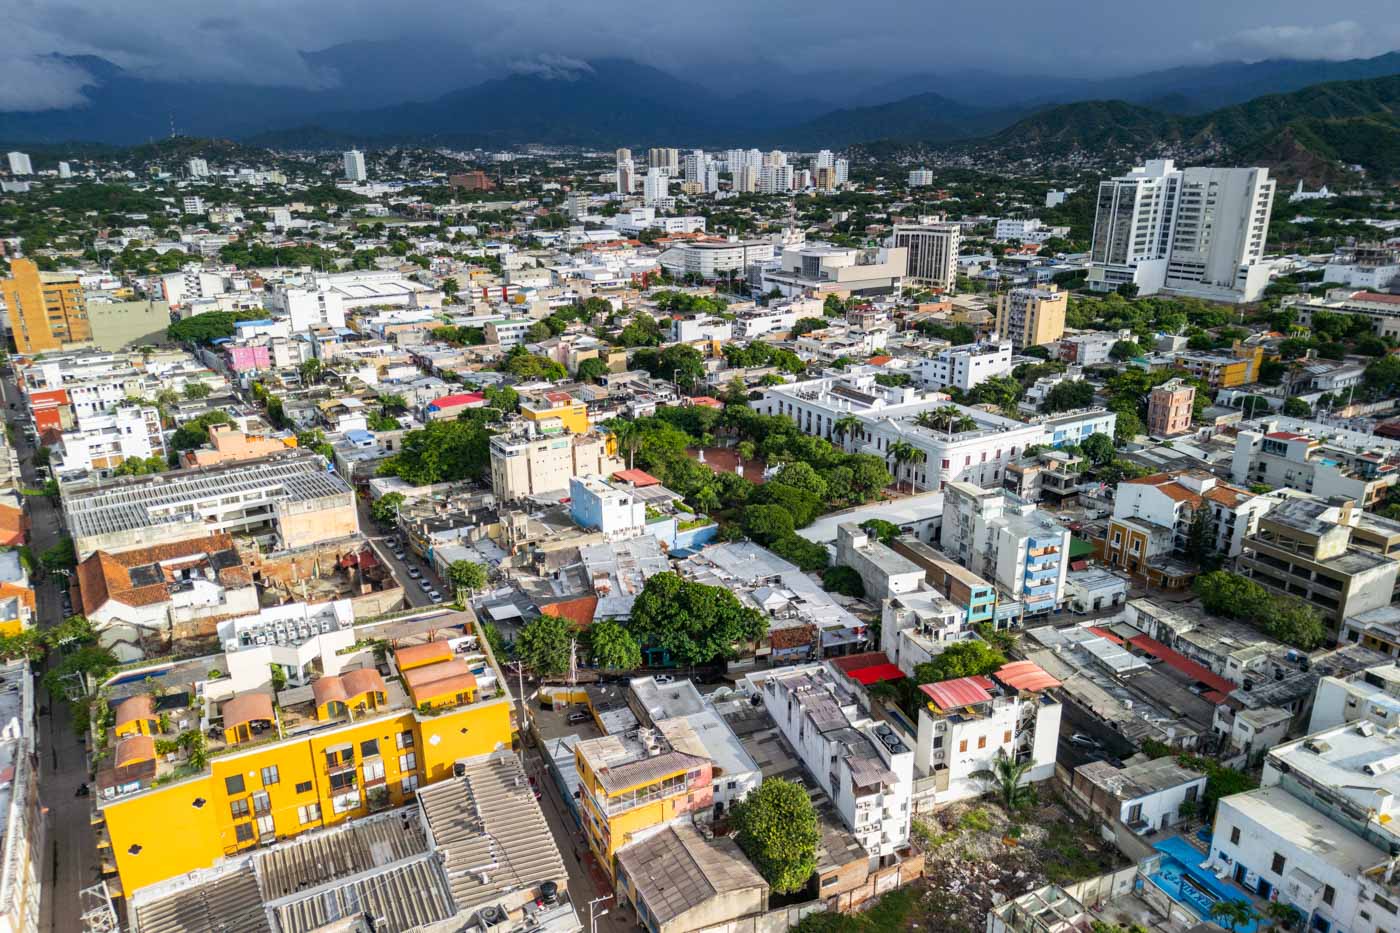 Aerial photo across downtown Santa Marta on a stormy day.